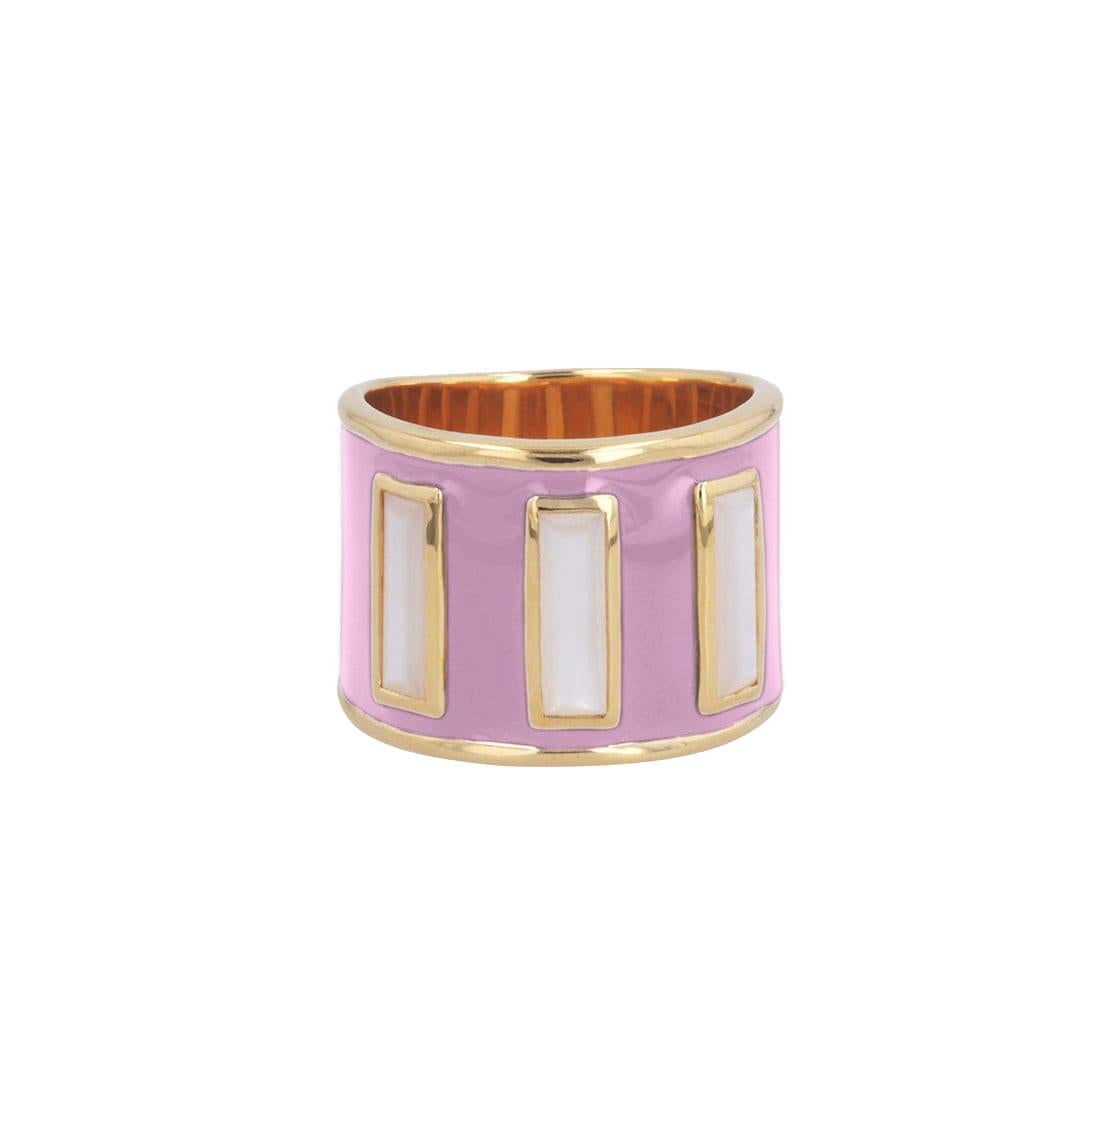 I always found myself stealing my mom’s extravagant rings for the big days in my life as I found that they can truly transform and shape your attitude. Inspired by the bold and sculptural rings my mom wears daily, and the sense of empowerment they